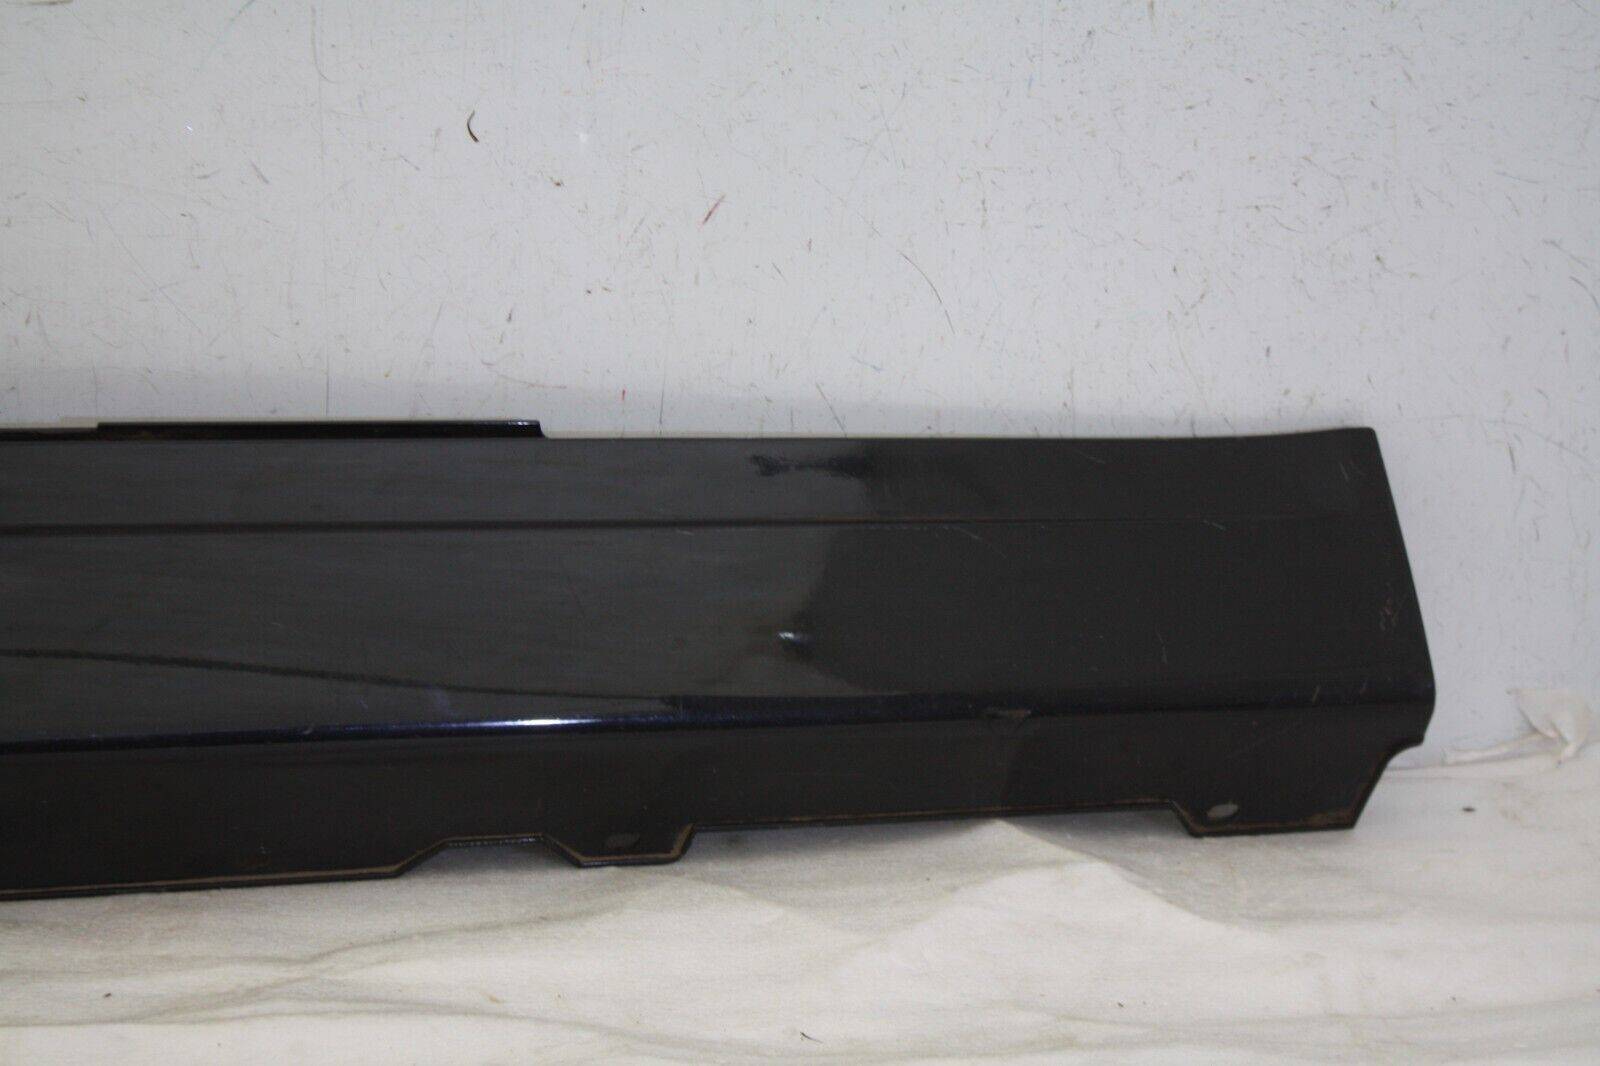 Jaguar-XK-Right-Side-Skirt-2006-TO-2009-6W83-10154-A-Genuine-SEE-PICS-176204486572-2